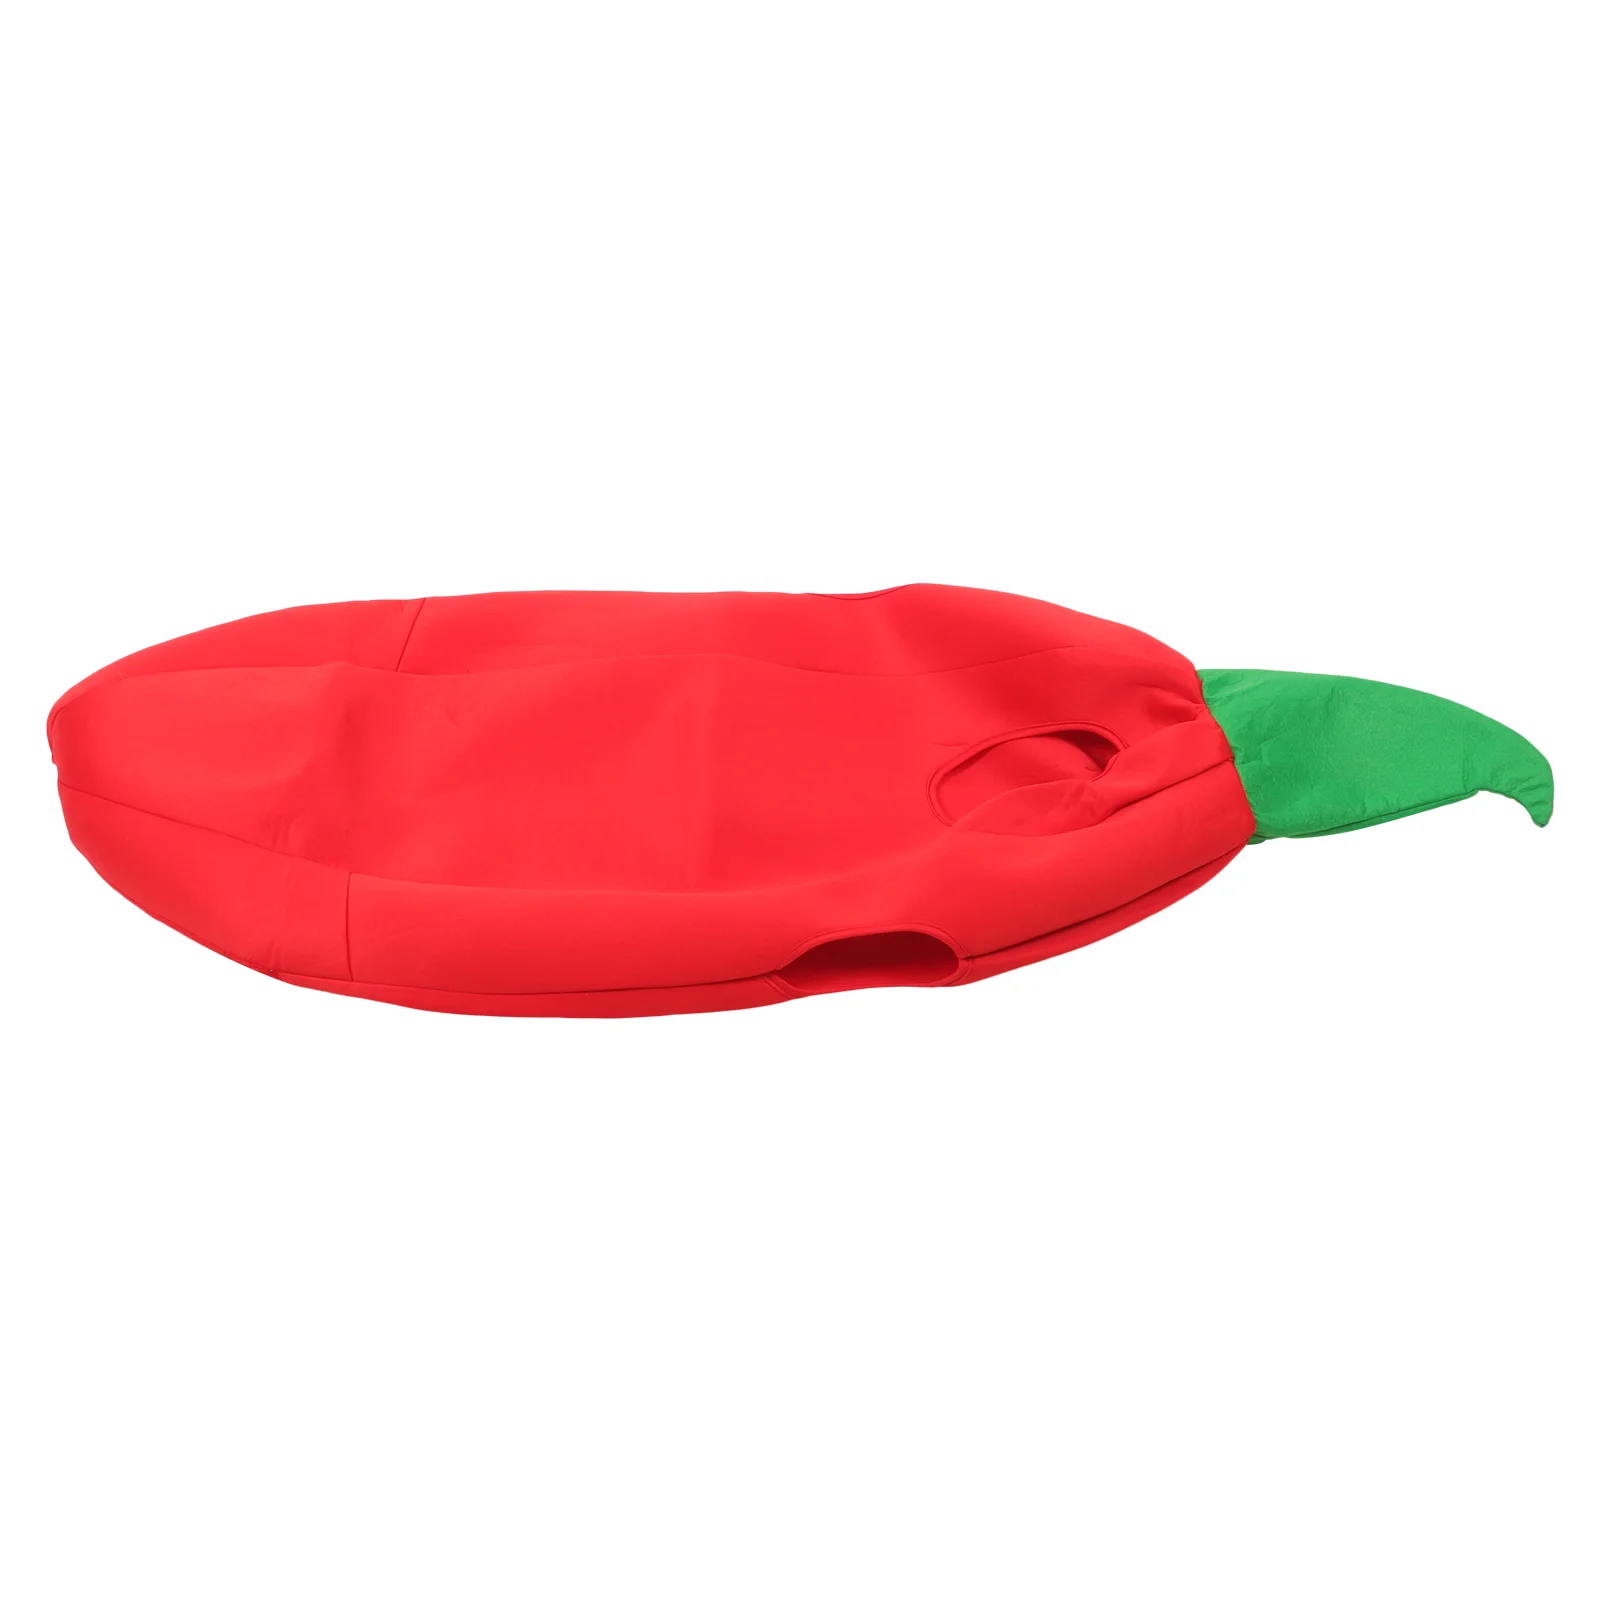 

Chili Pepper Costume Chili Cosplay Costume Kids Chili Outfit Funny Vegetable Dress Up Cinco De Mayo Fiesta Party Clothing Red